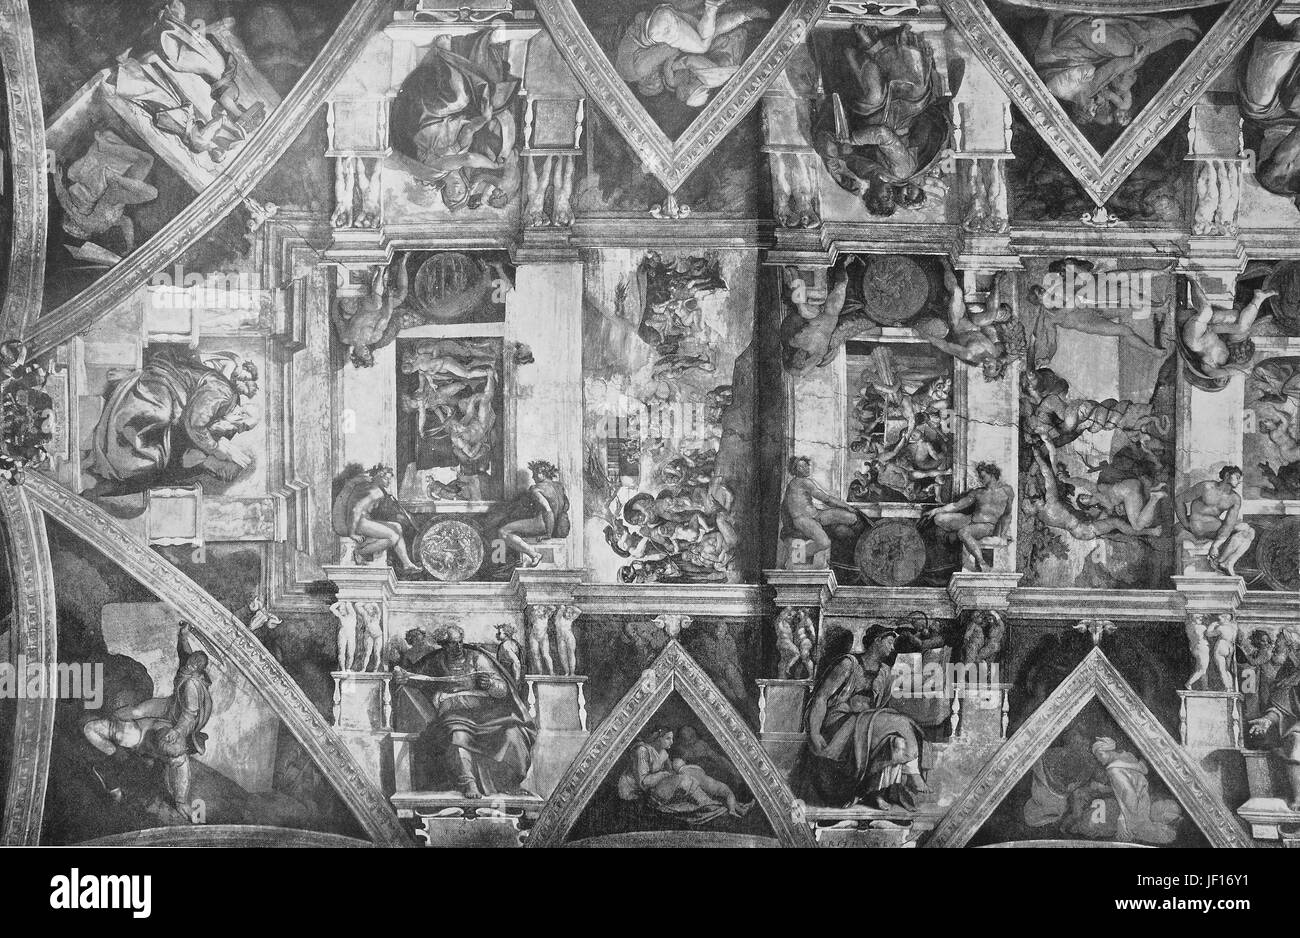 Historical image of A section of the Sistine Chapel ceiling, Michelangelo, Vatican, Rome, Italy,  Digital improved reproduction from an original print from 1890 Stock Photo